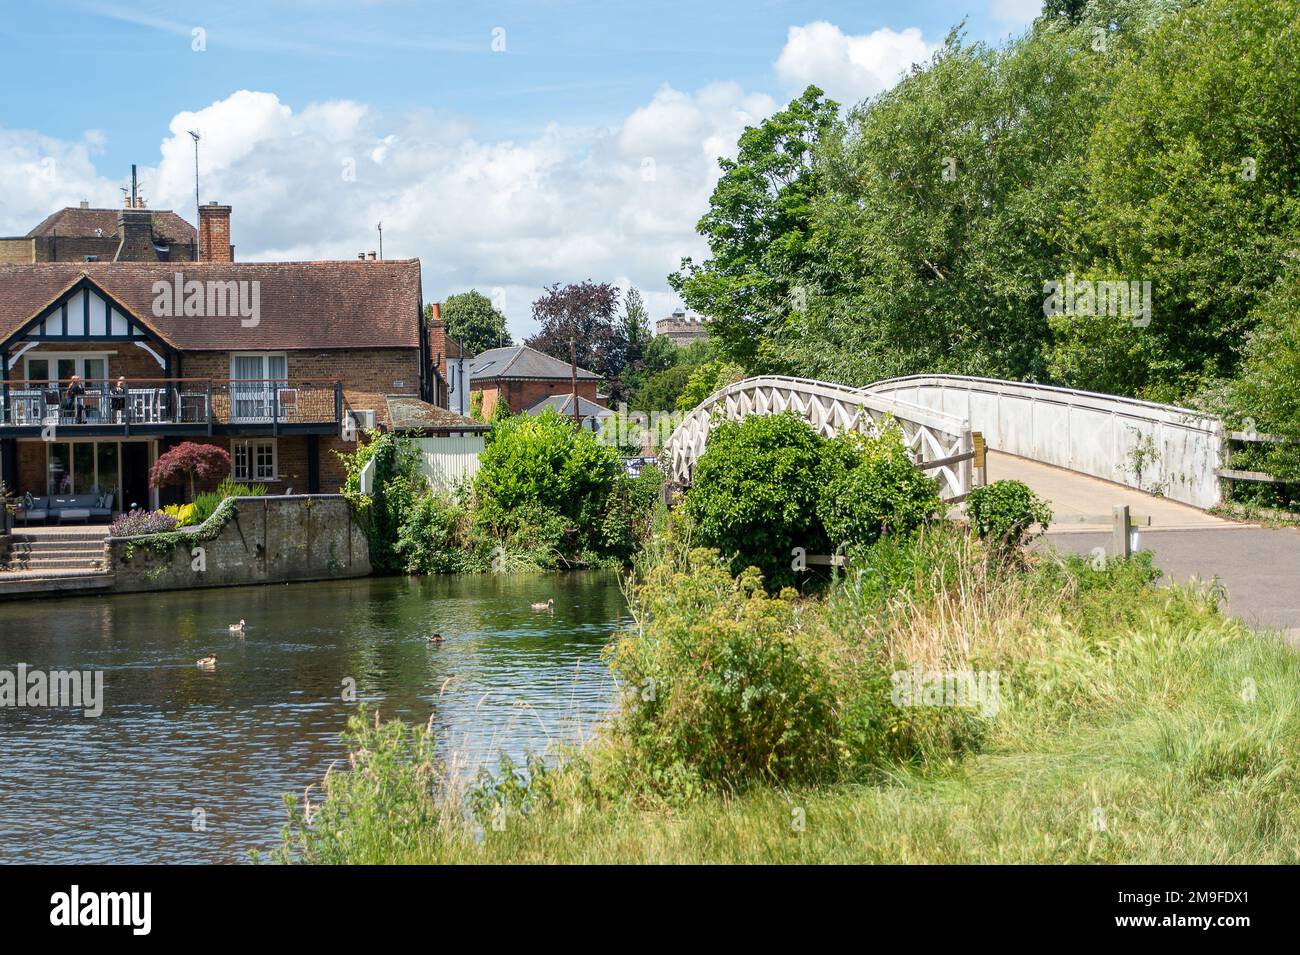 Cookham, Berkshire, UK. 26th June, 2022. The Odney Club owned by John Lewis in Cookham. Credit: Maureen McLean/Alamy Stock Photo